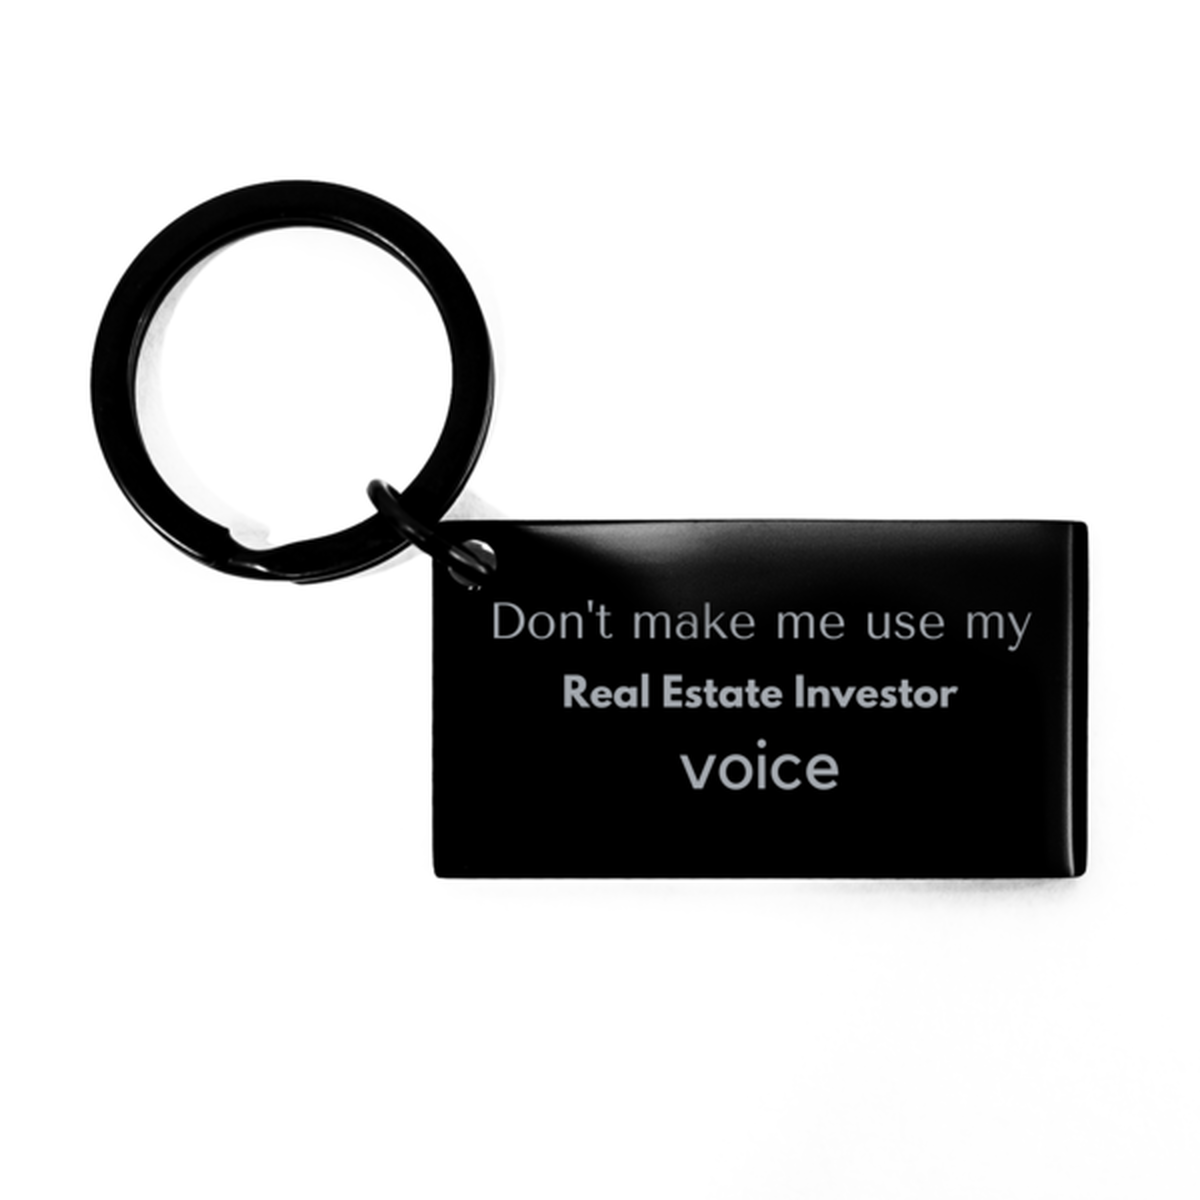 Don't make me use my Real Estate Investor voice, Sarcasm Real Estate Investor Gifts, Christmas Real Estate Investor Keychain Birthday Unique Gifts For Real Estate Investor Coworkers, Men, Women, Colleague, Friends